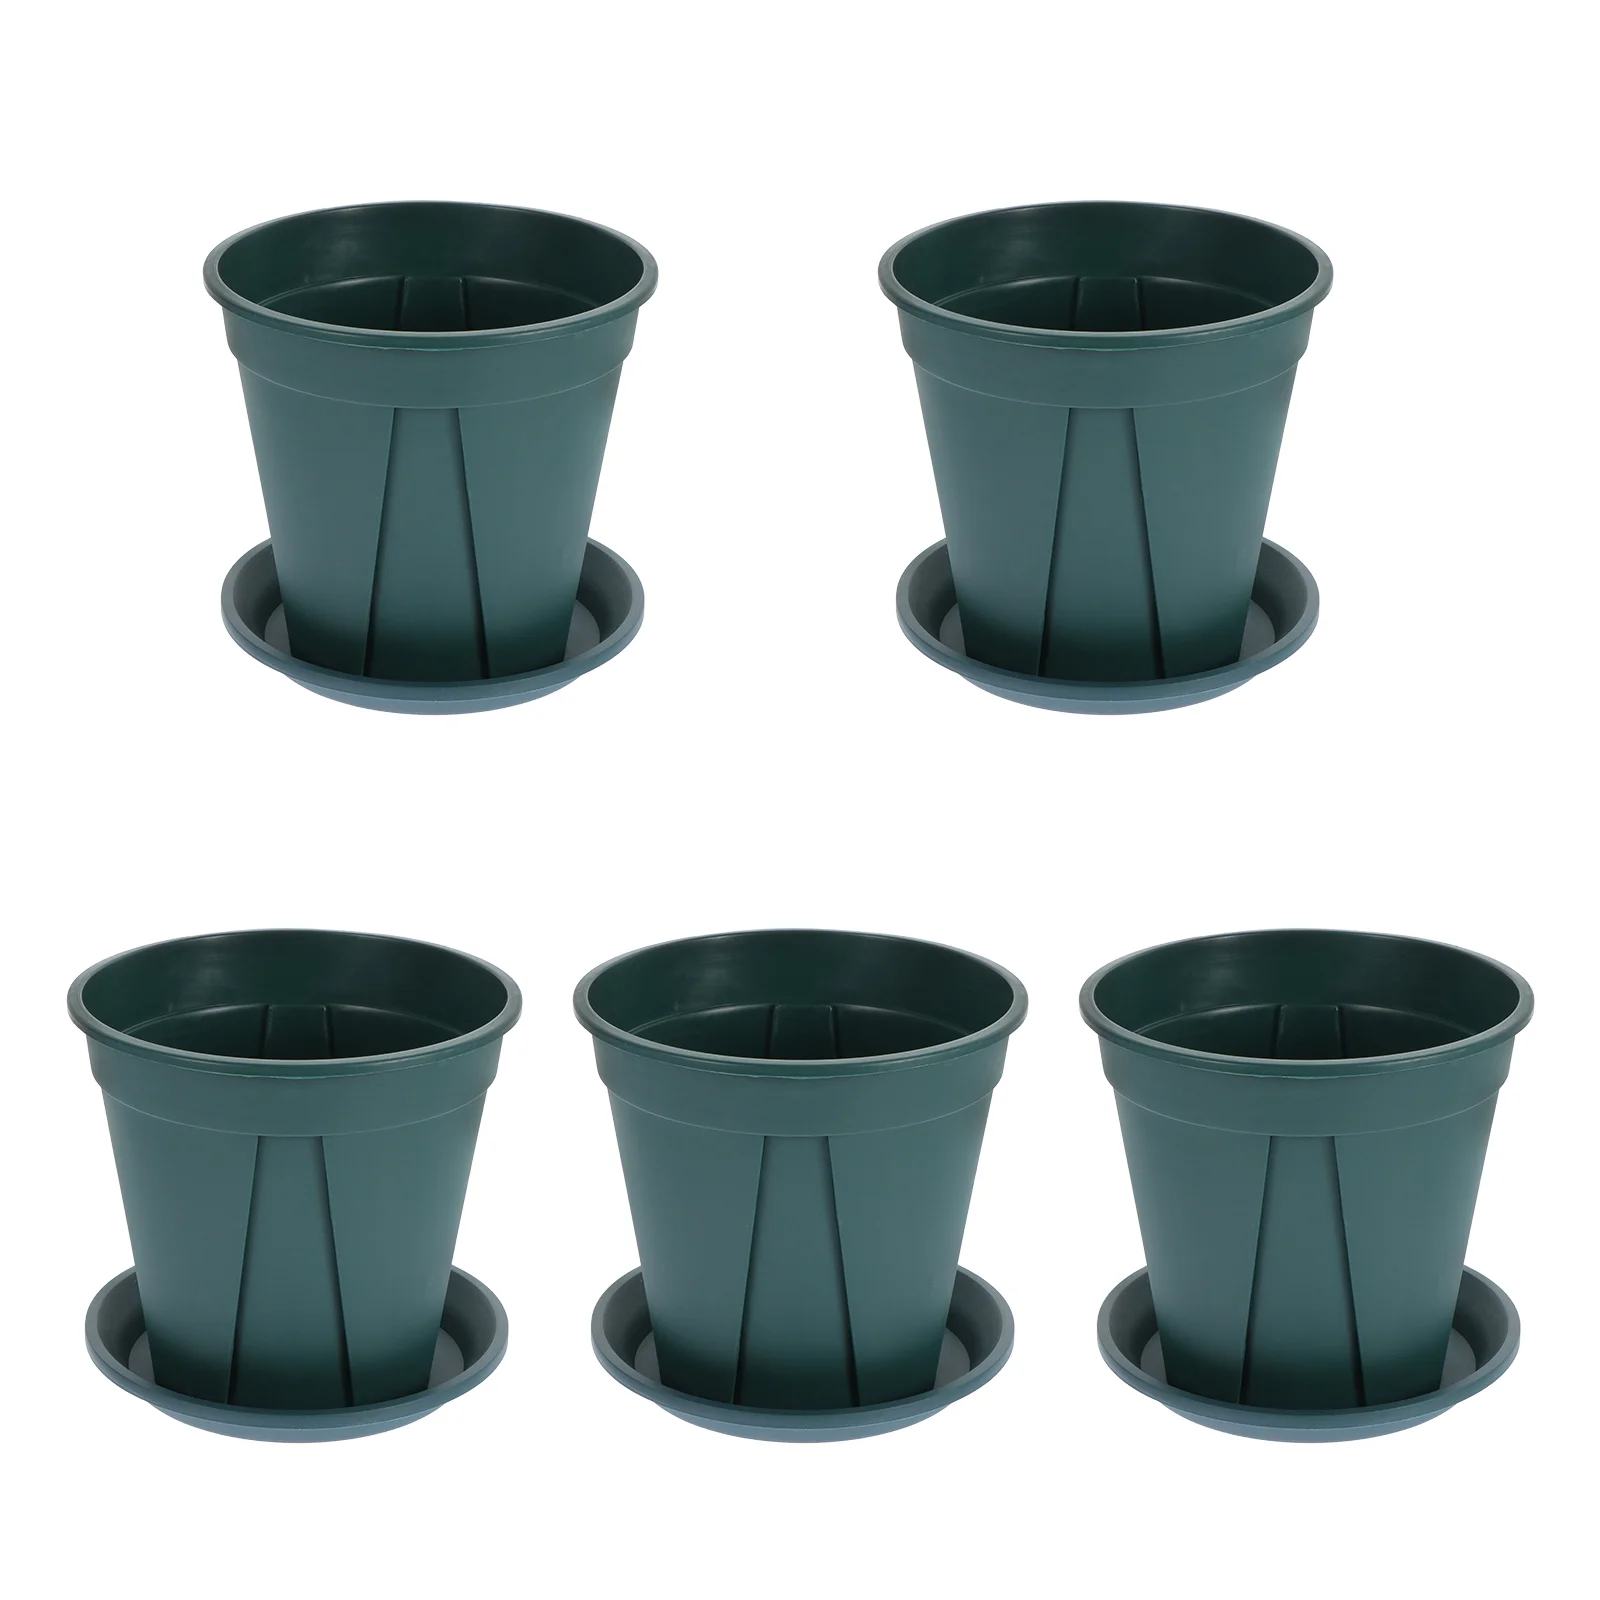 

5 Sets Root Control Gallon Pots Plastic Planters Tray Flower Outdoors Holders Indoor Flowerpots Creative Garden Decors Small